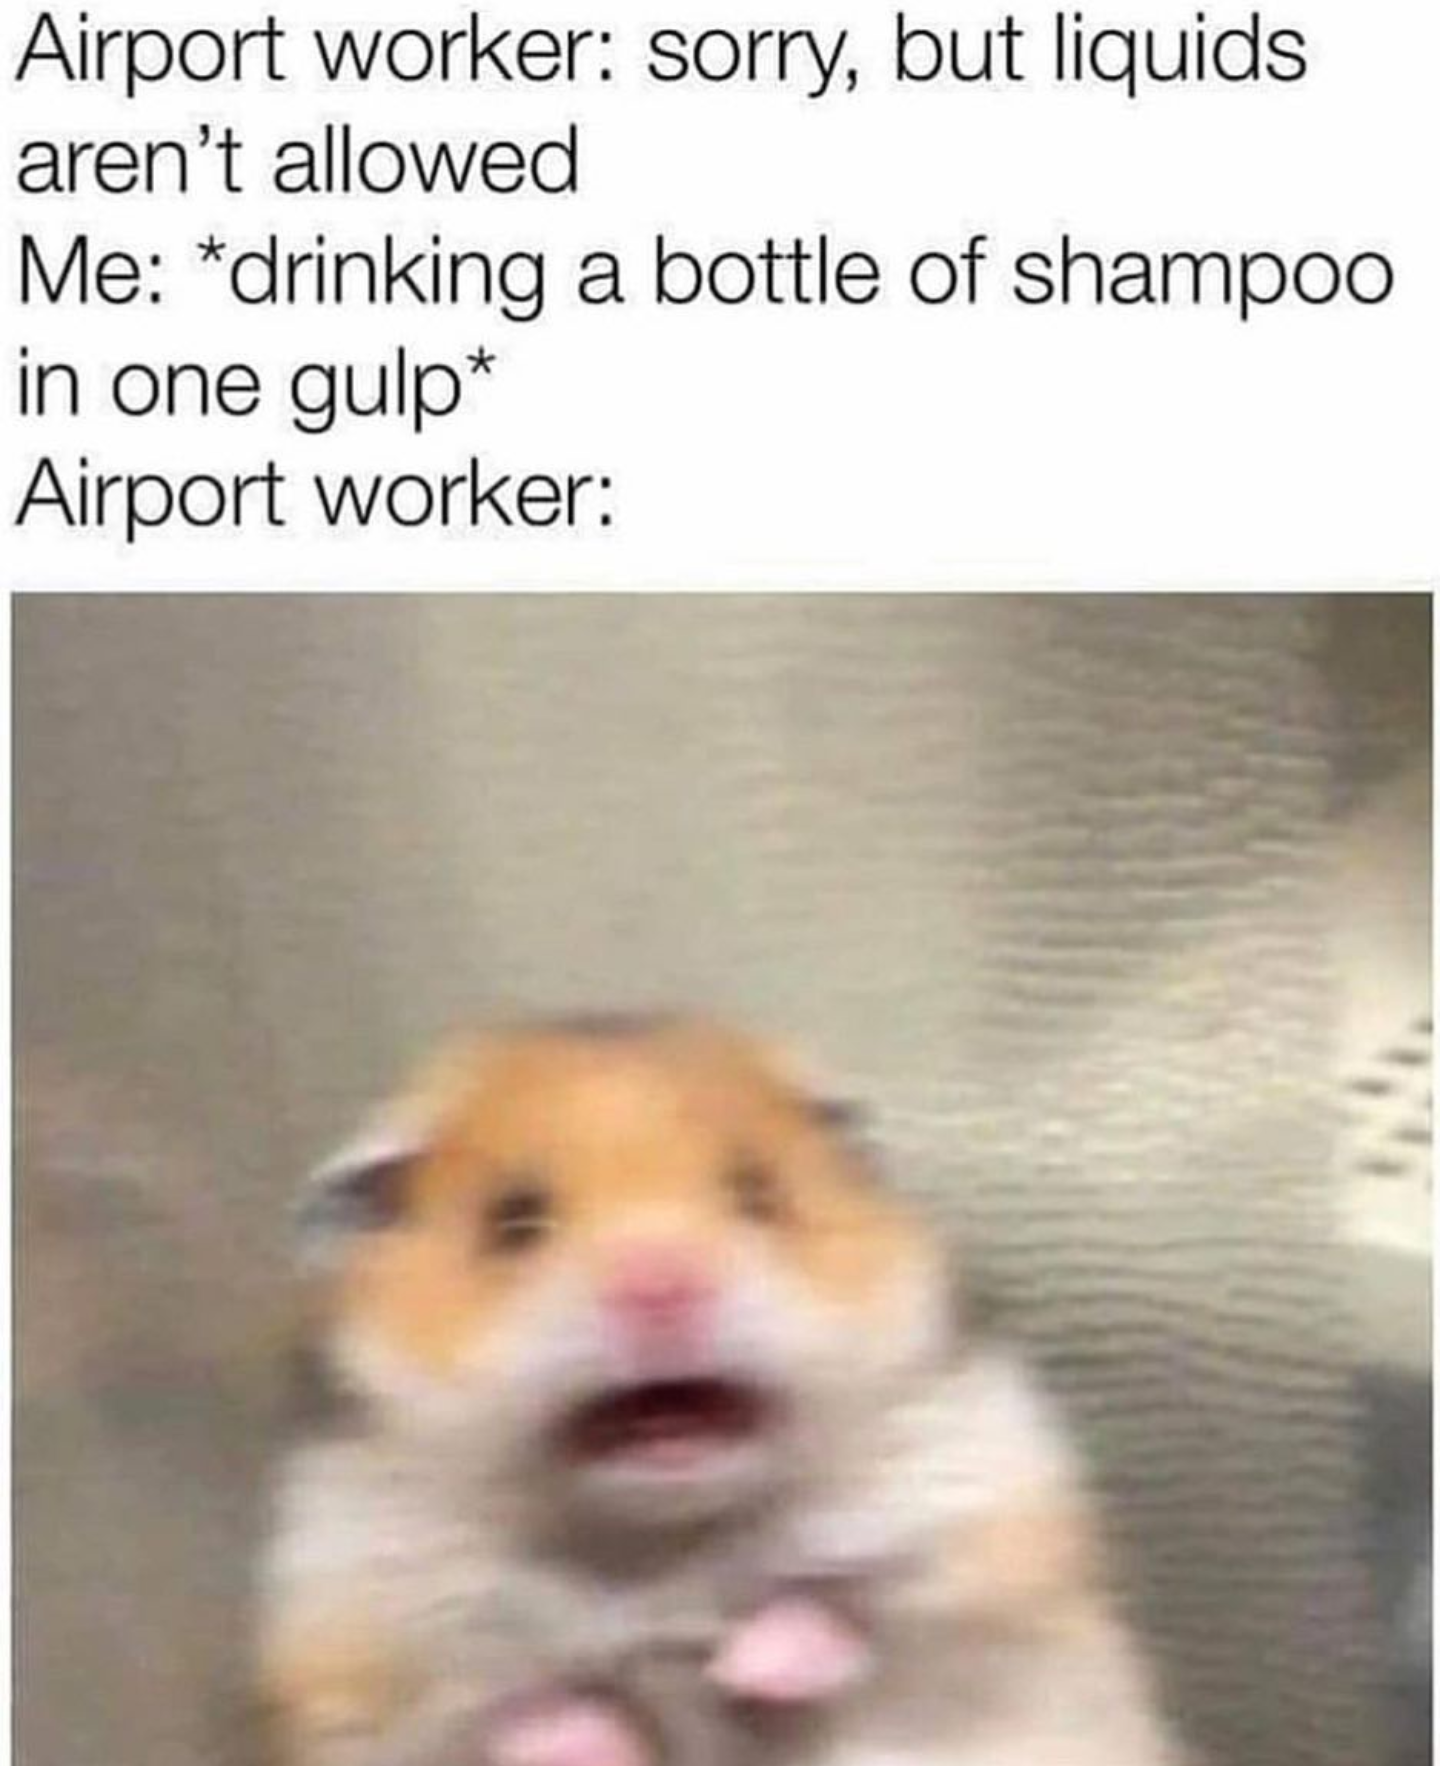 airport security meme - Airport worker sorry, but liquids aren't allowed Me drinking a bottle of shampoo in one gulp Airport worker